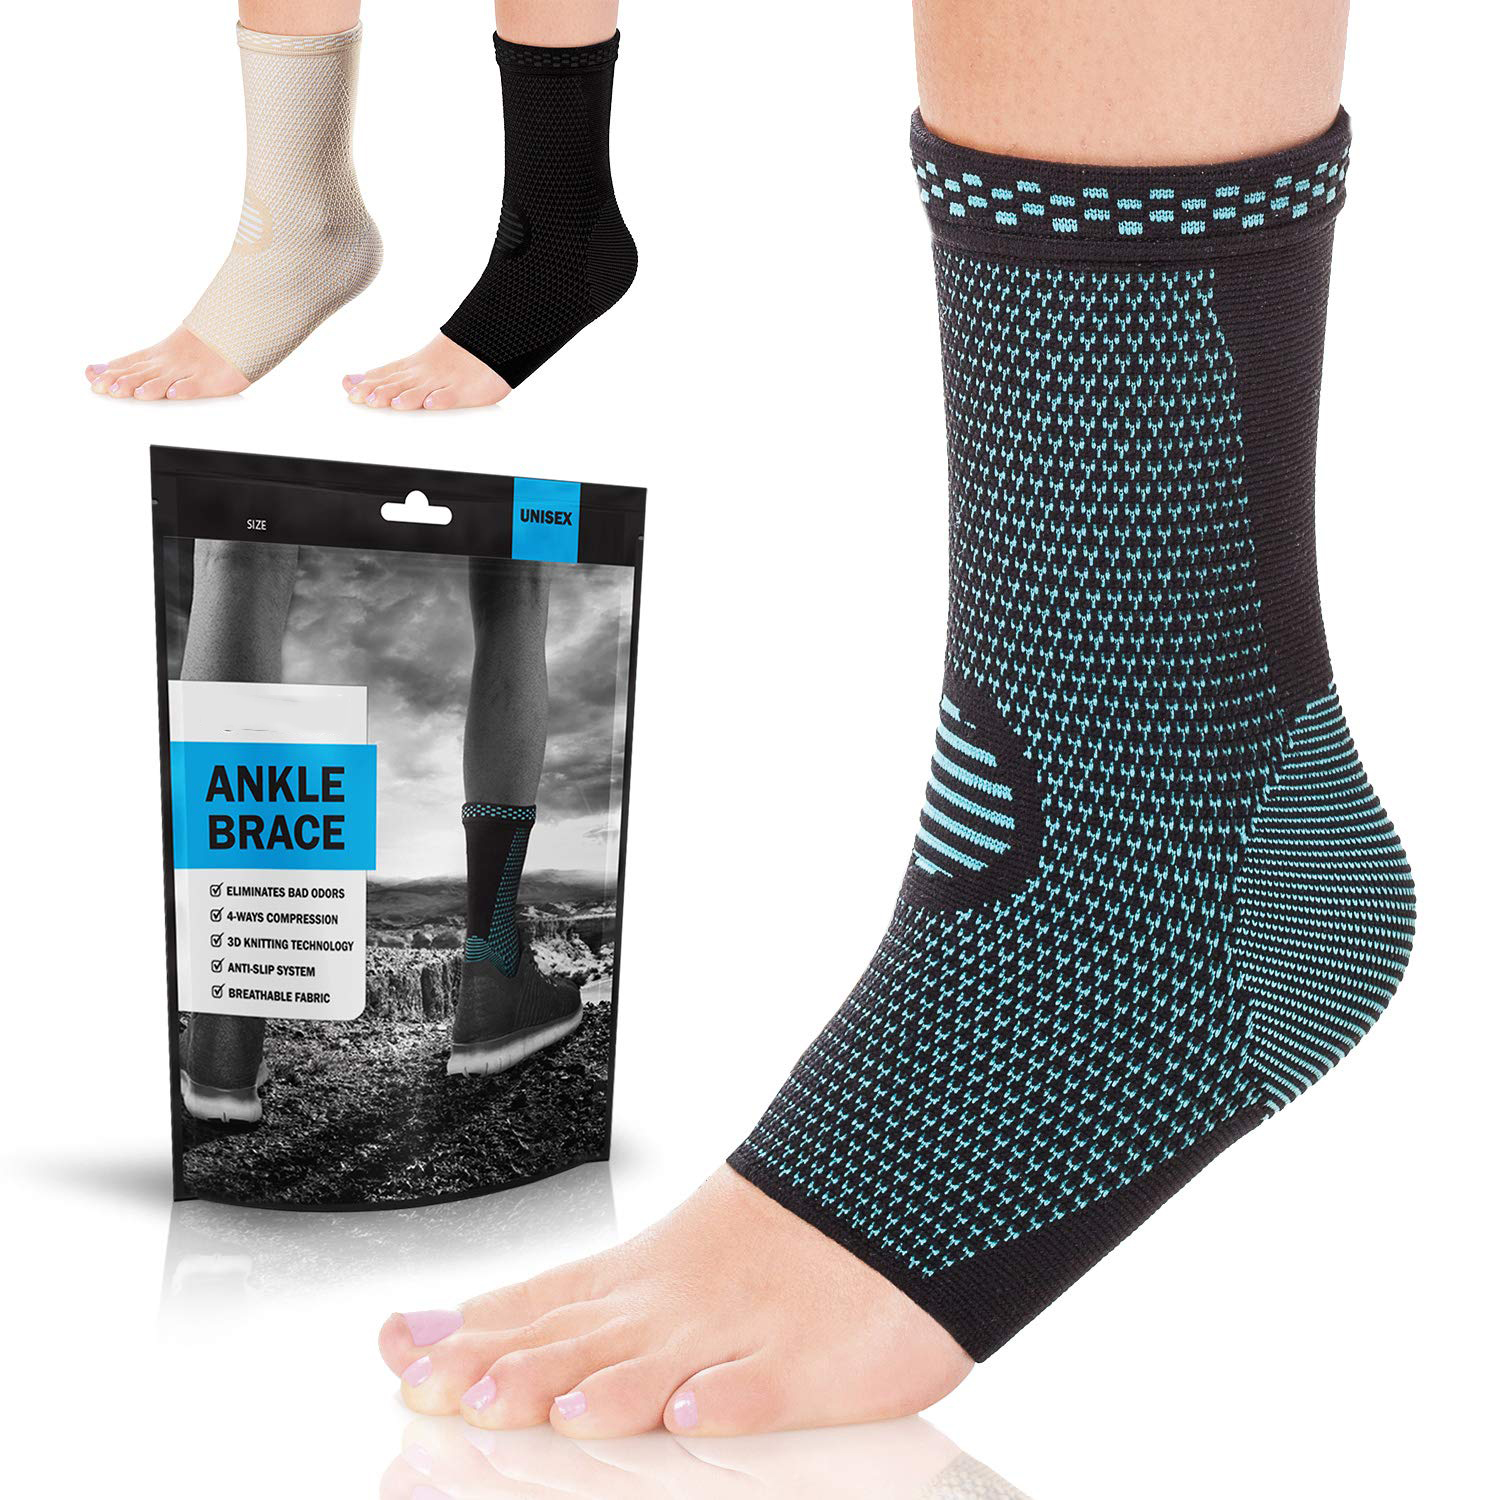 Manufacturing Companies for Copper Shoulder Sleeve - Ankle Brace Compression Support Sleeve (Pair) for Injury Recovery, Joint Pain and More. Achilles Tendon Support, Plantar Fasciitis Foot Socks w...